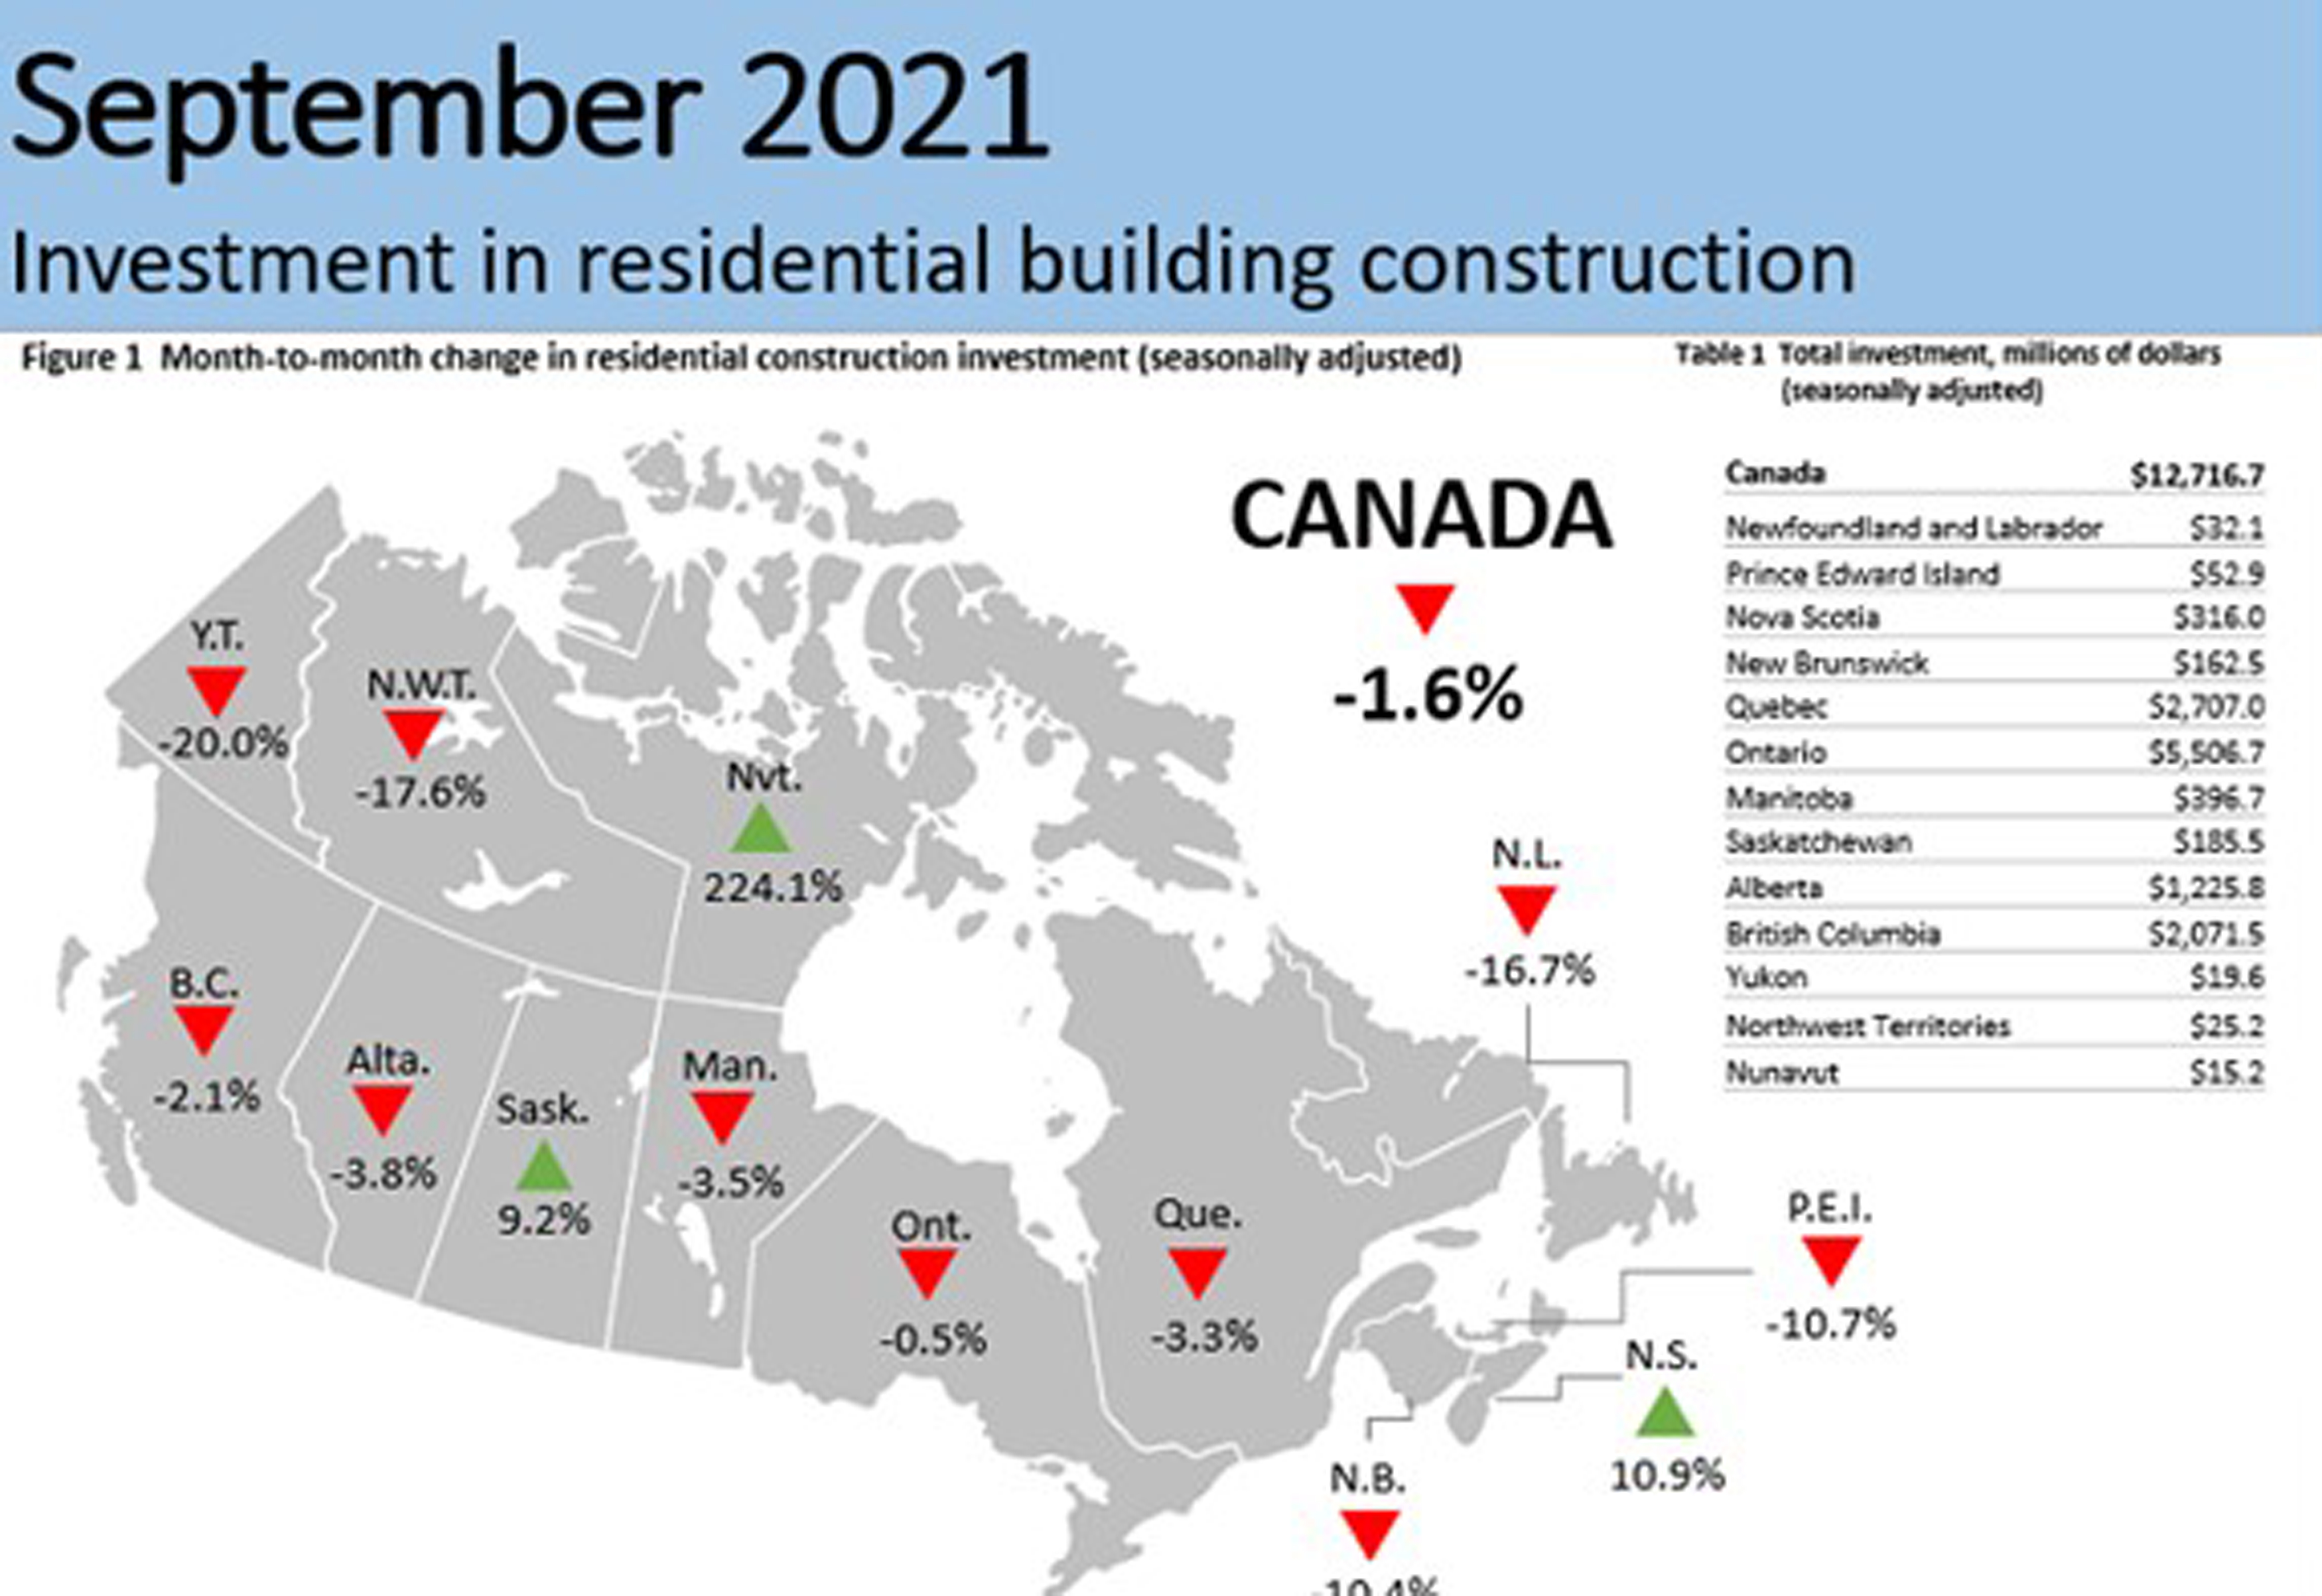 Investment in building construction, September 2021